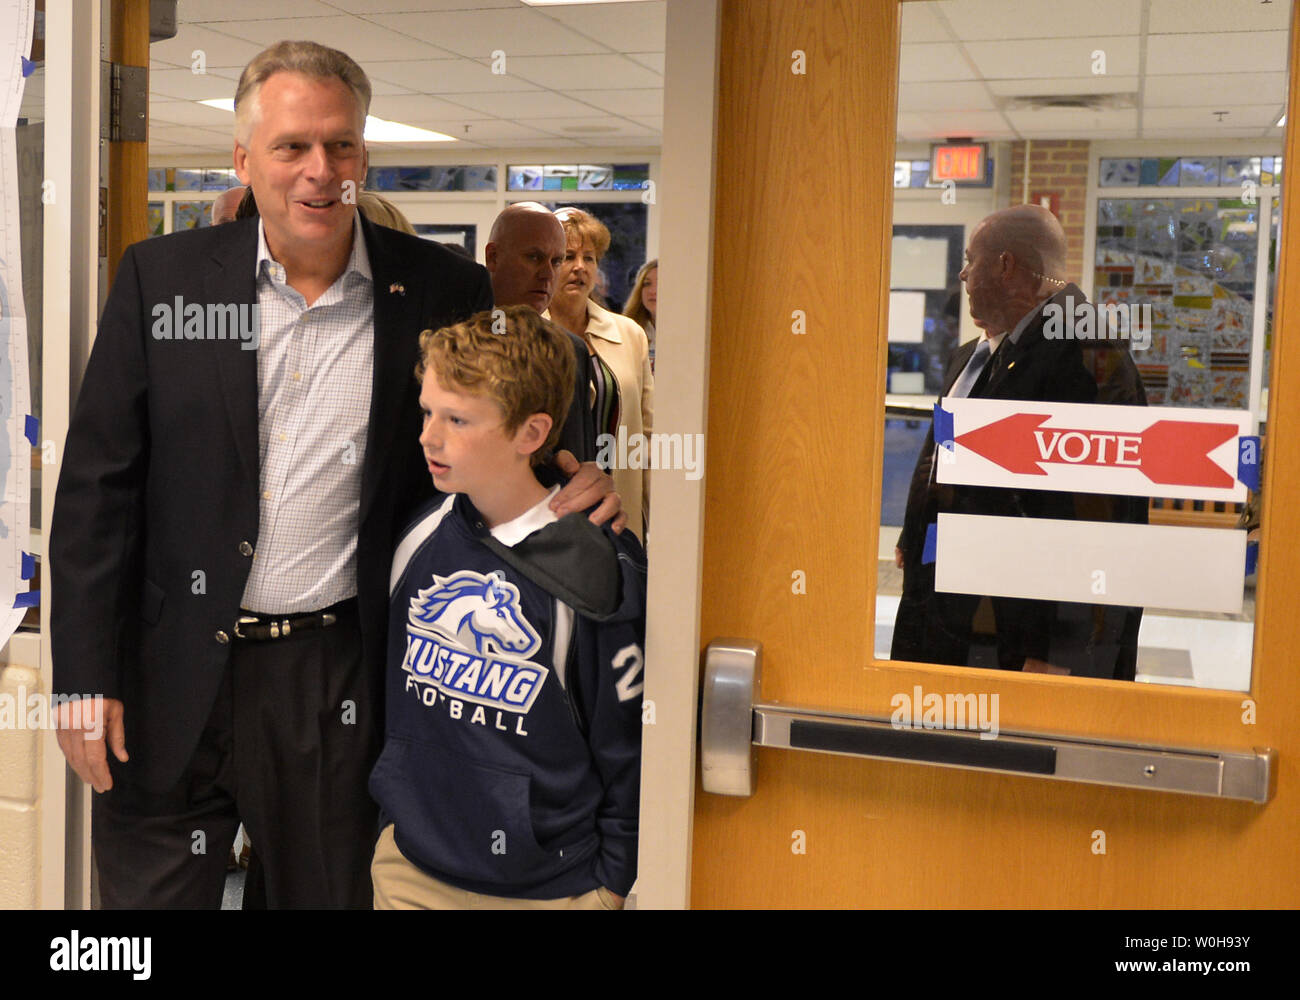 Virginia Democratic gubernatorial candidate Terry McAuliffe arrrives to vote with son Peter at the Spring Hill Elementary School, in McLean, Virginia, November 5, 2013. McAuliffe is running against former Virginia Attorney General Republican Ken Cuccinelli.        UPI/Mike Theiler Stock Photo